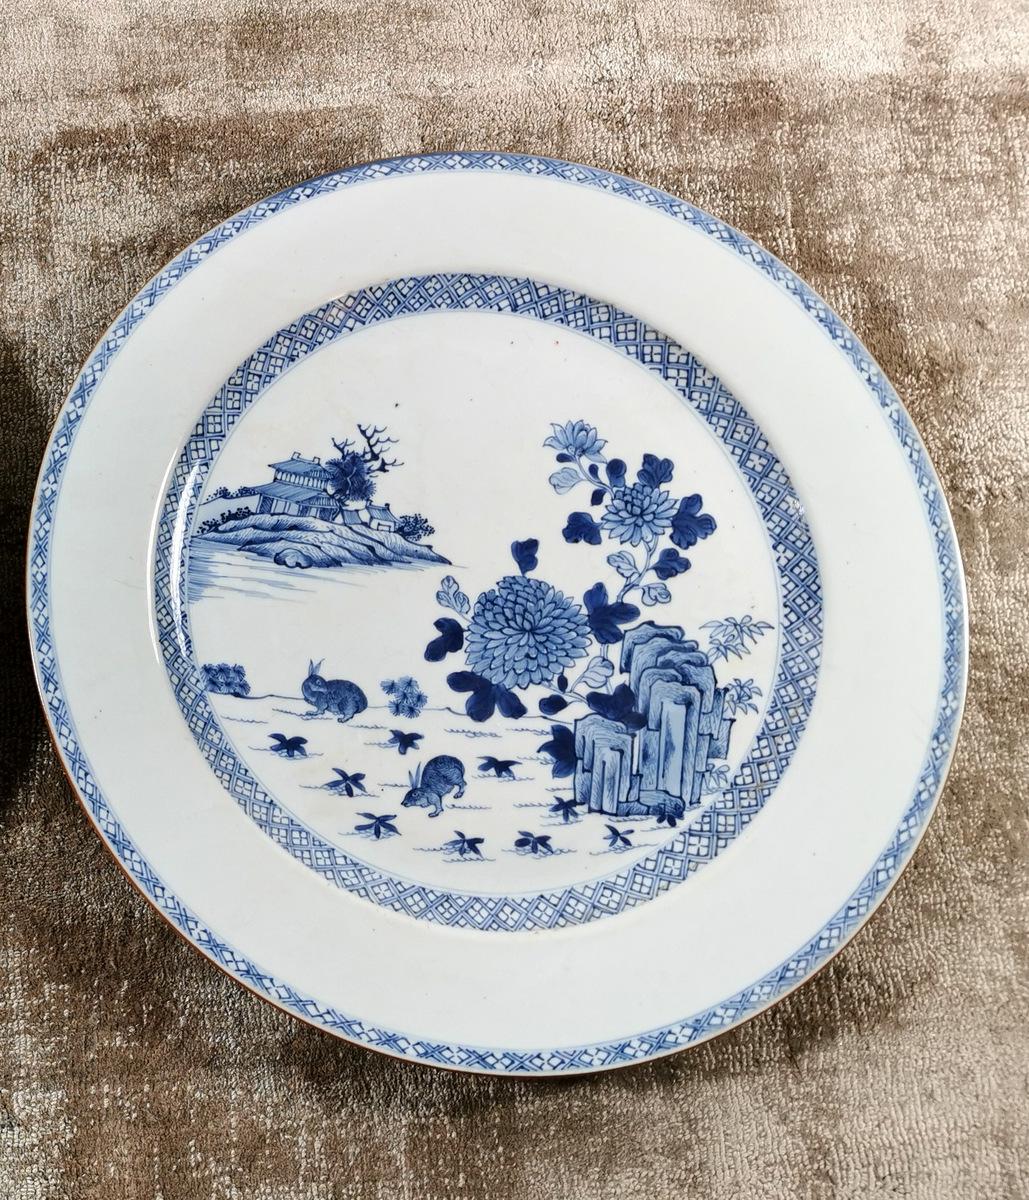 We kindly suggest you read the whole description, because with it we try to give you detailed technical and historical information to guarantee the authenticity of our objects.
Large Chinese porcelain plates/trays with cobalt blue hand-painted